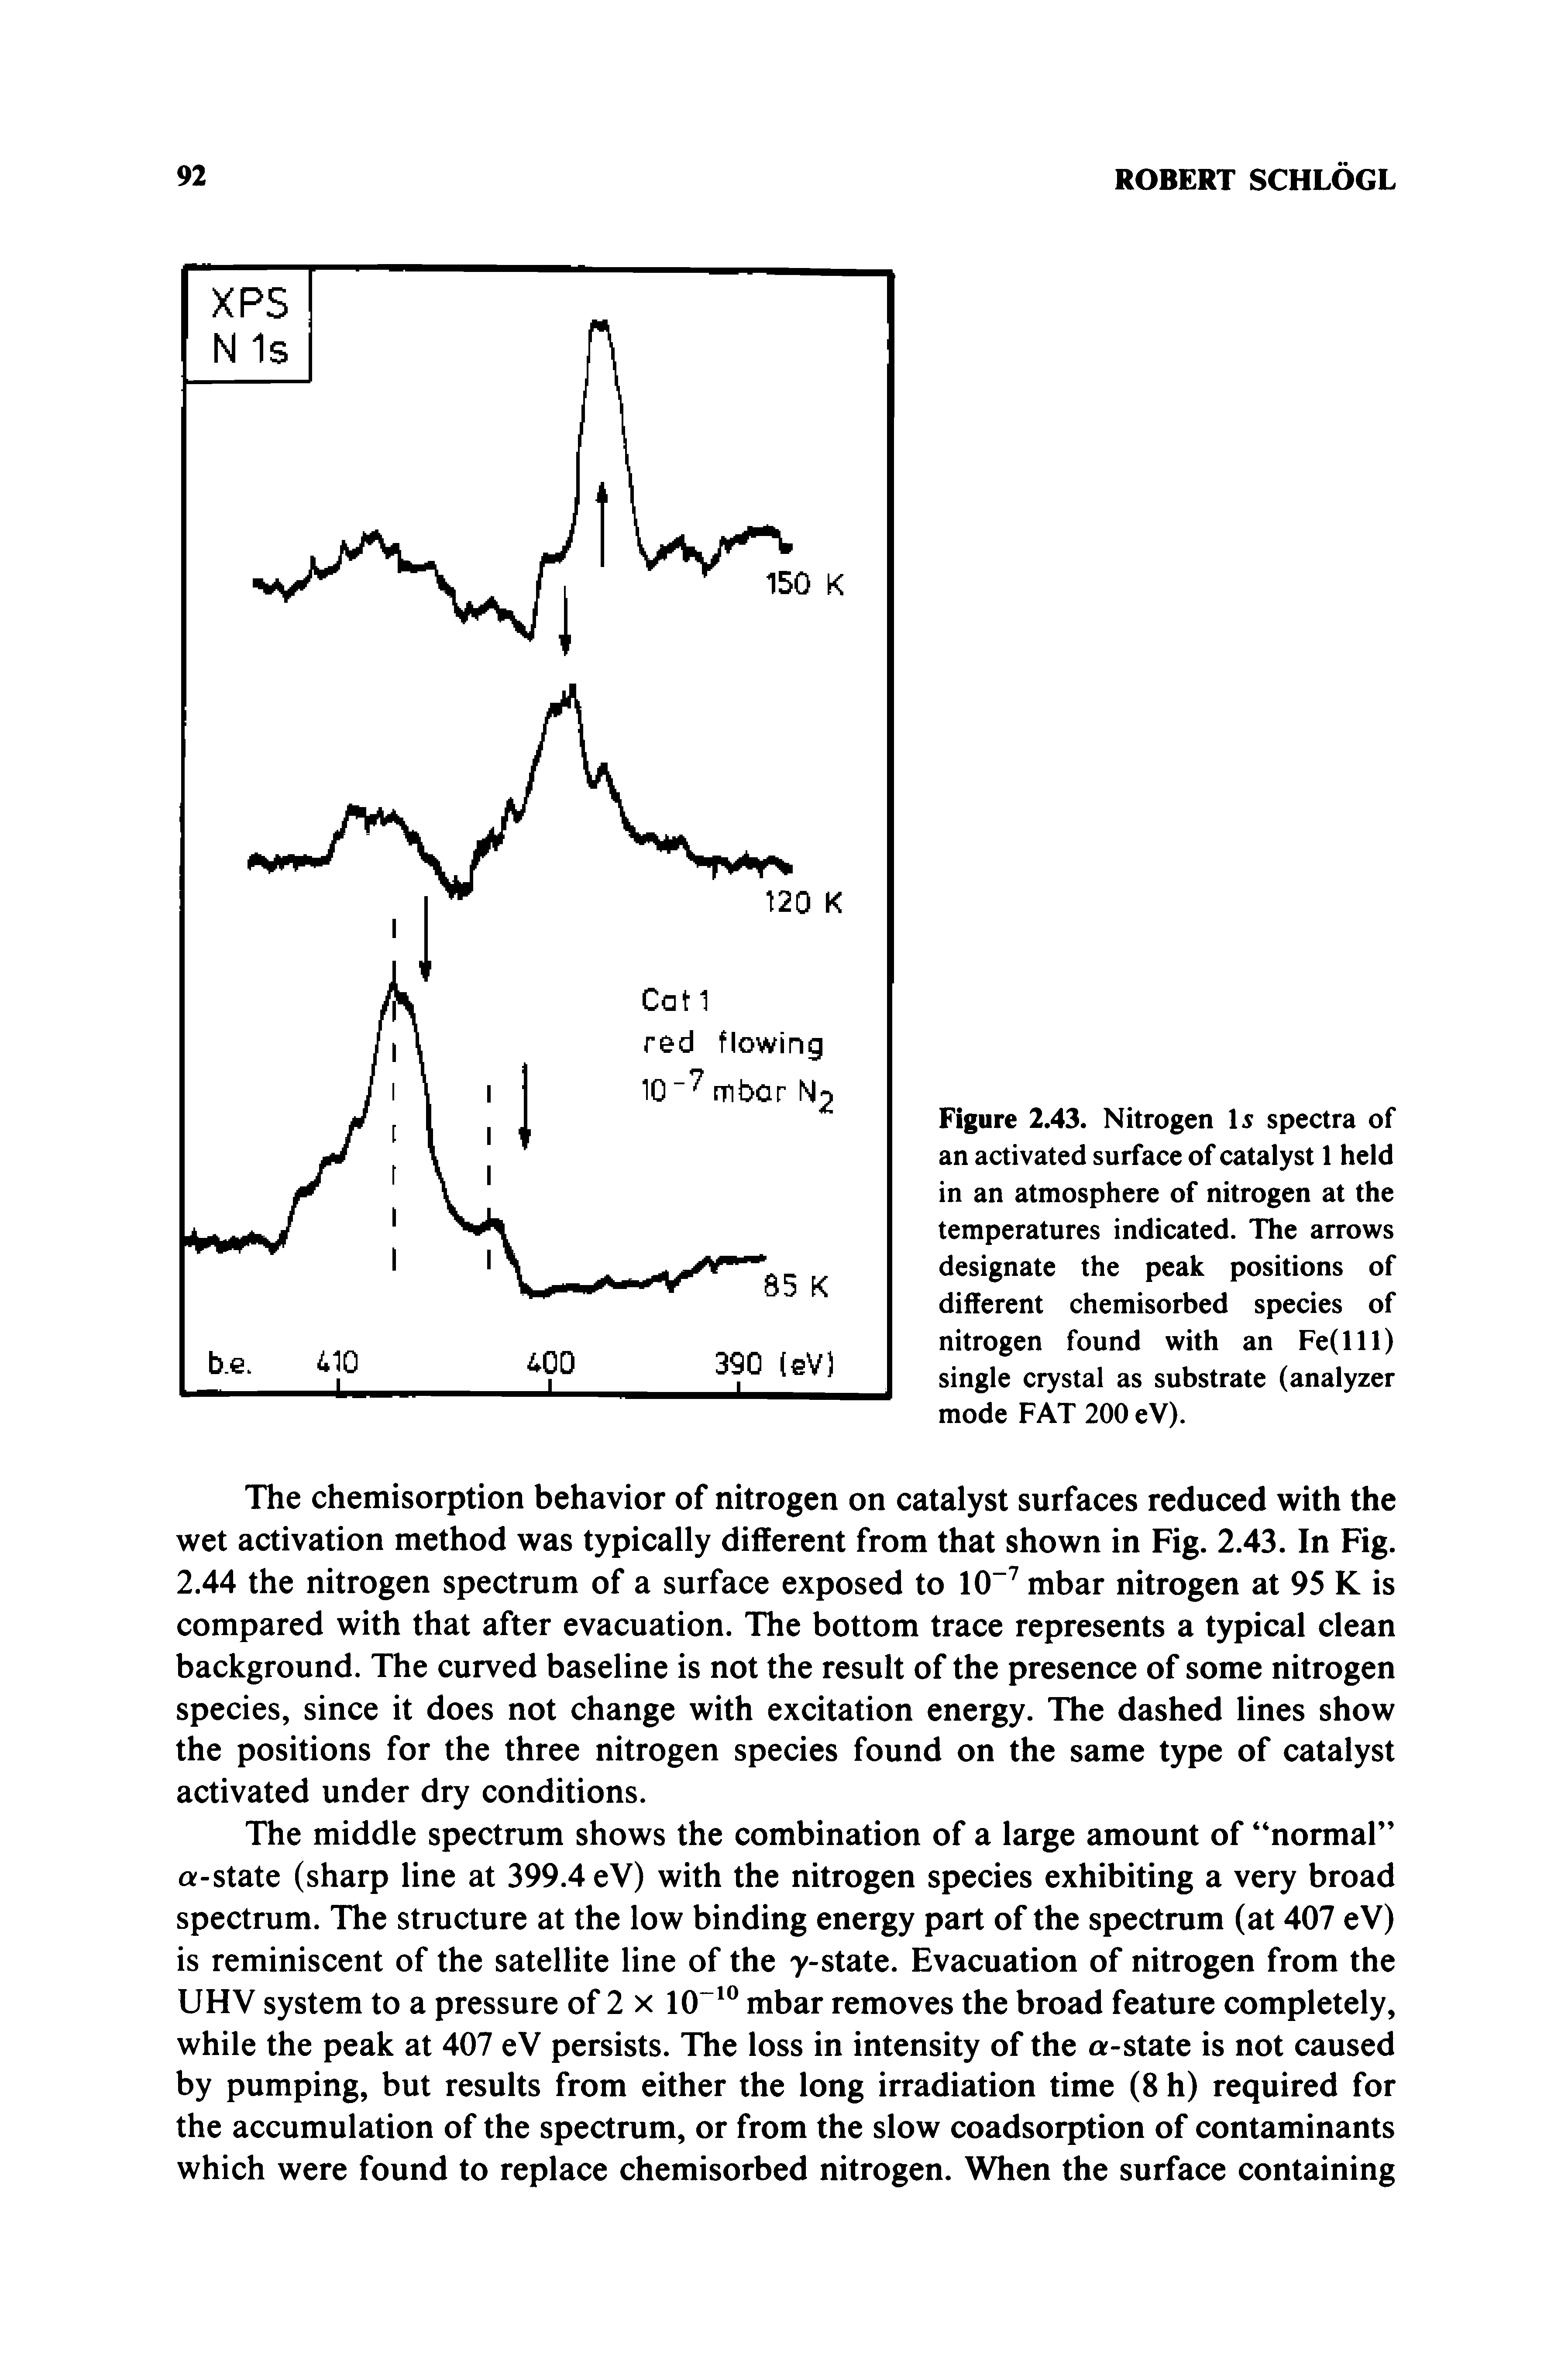 Figure 2.43. Nitrogen I5 spectra of an activated surface of catalyst 1 held in an atmosphere of nitrogen at the temperatures indicated. The arrows designate the peak positions of different chemisorbed species of nitrogen found with an Fe(lll) single crystal as substrate (analyzer mode FAT 200 eV).